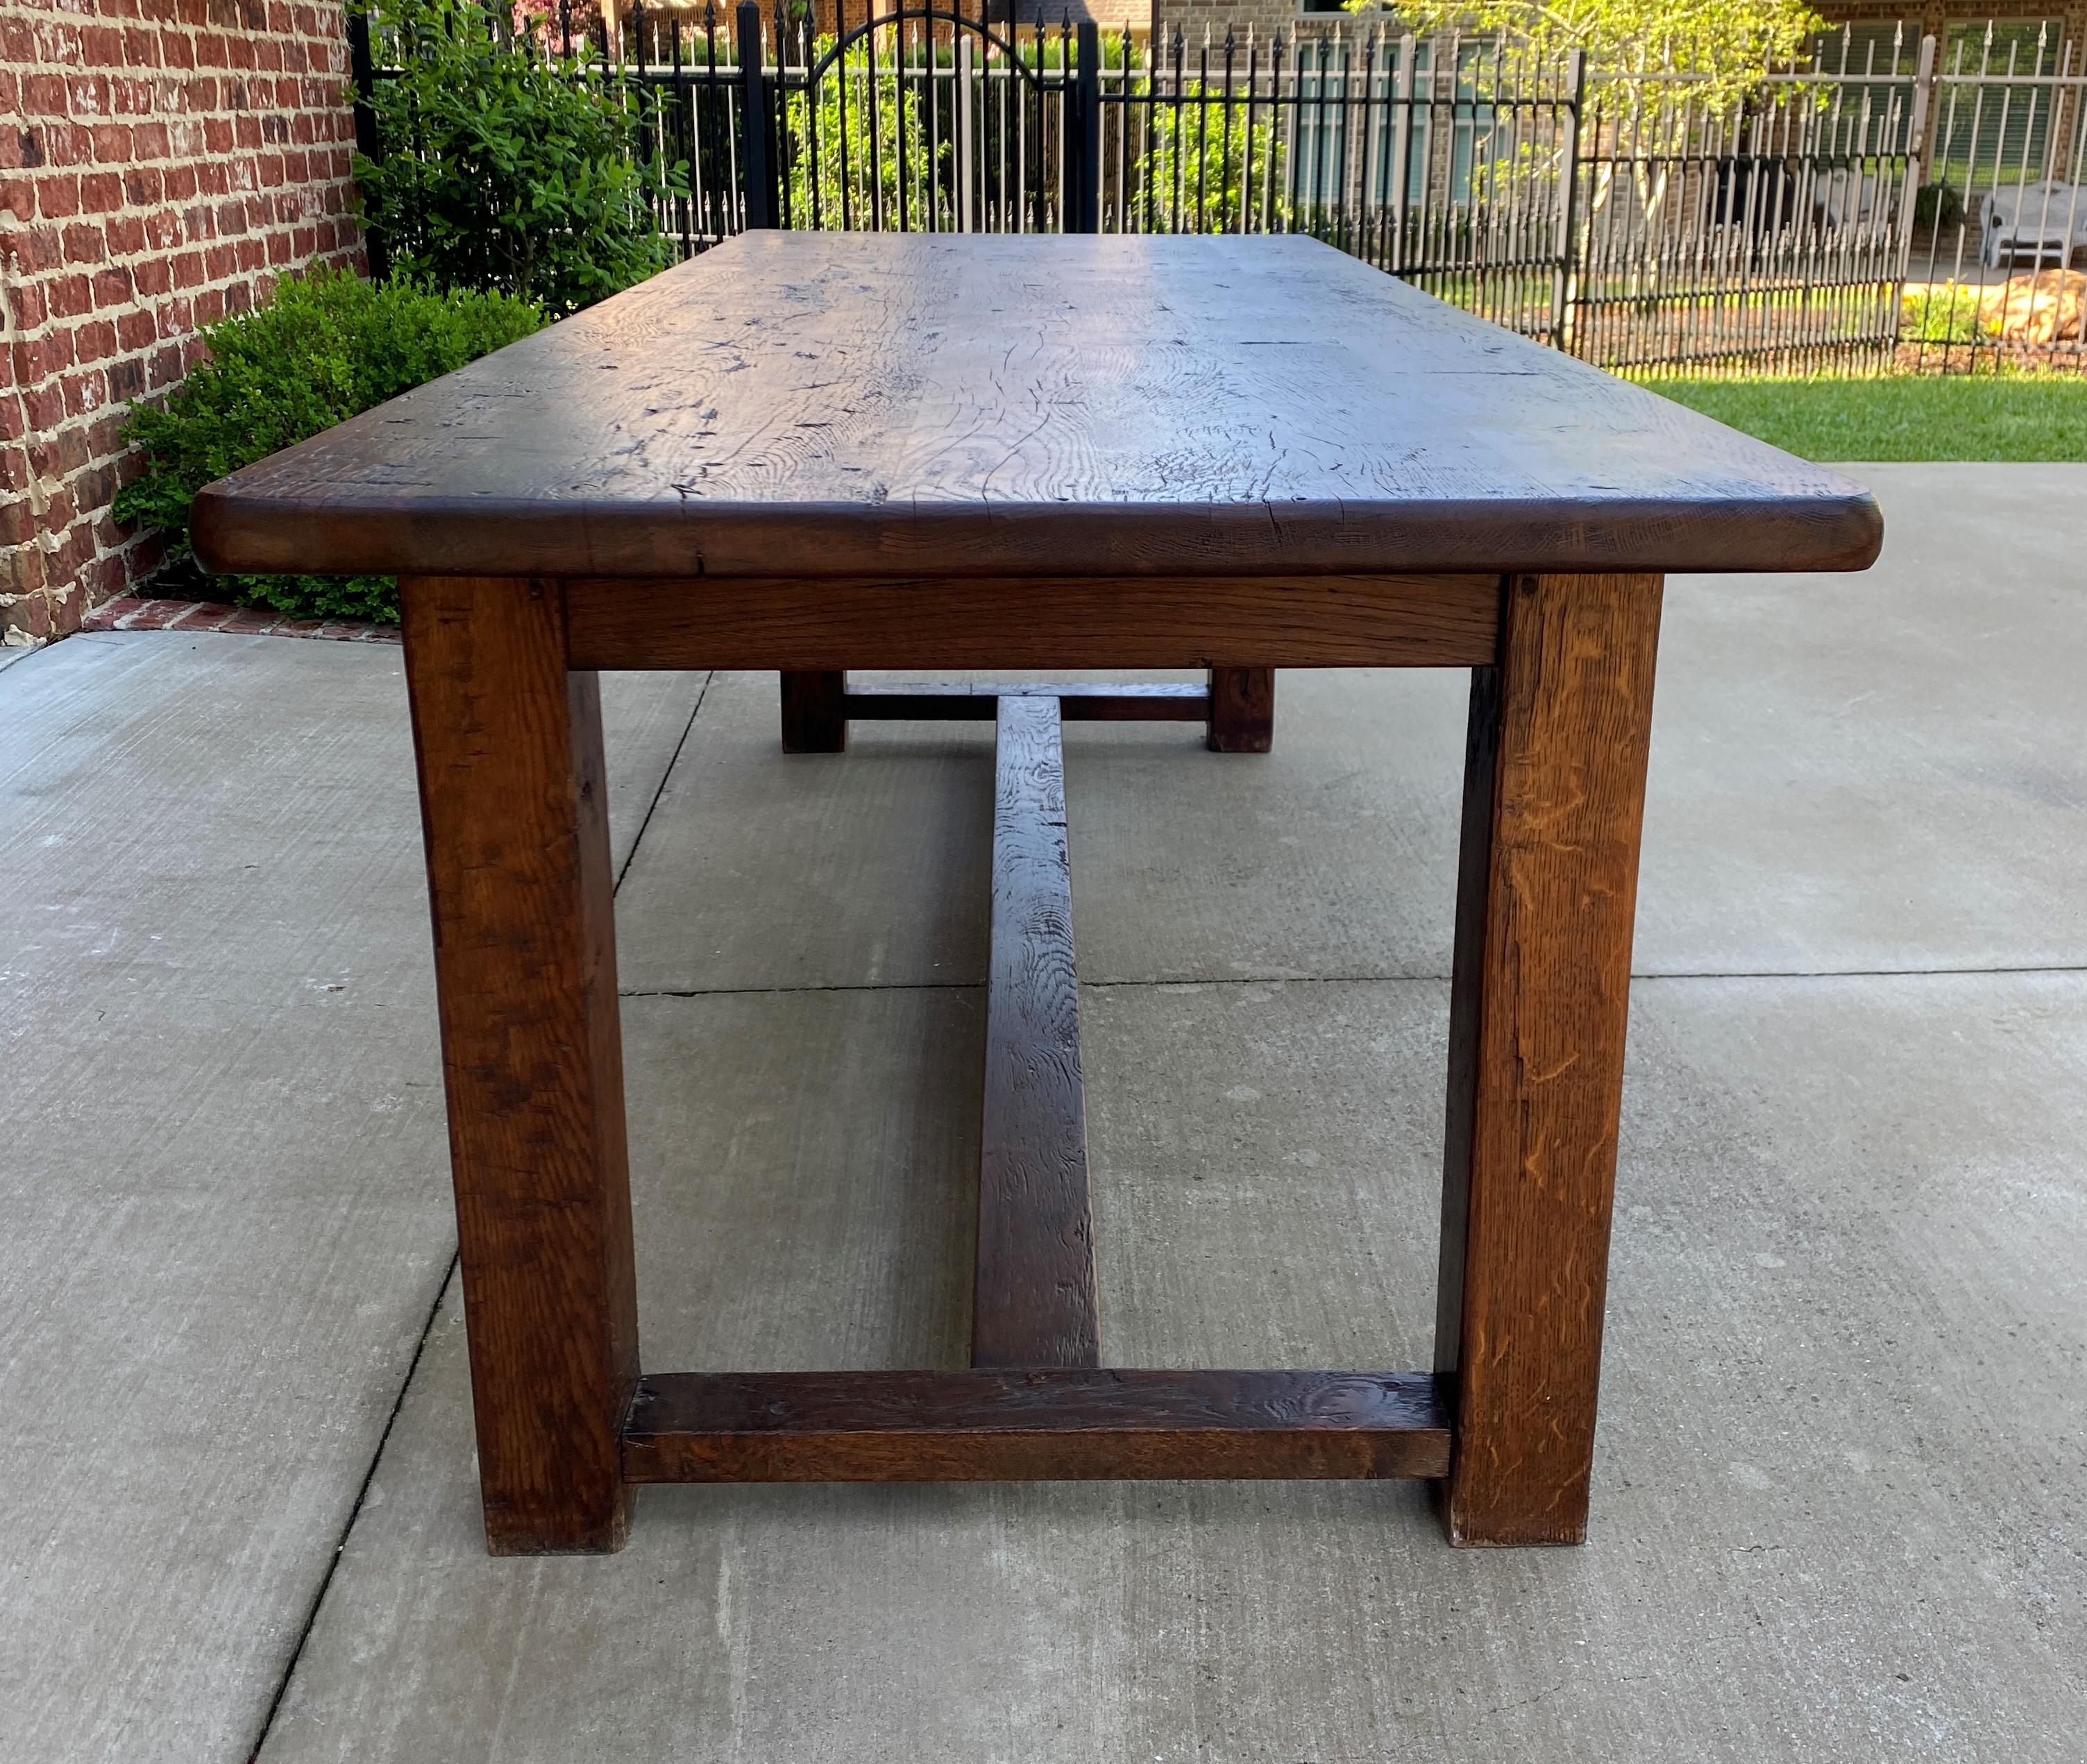 Antique French Farm Table Dining Library Table Desk Farmhouse Oak Rustic 19C 8